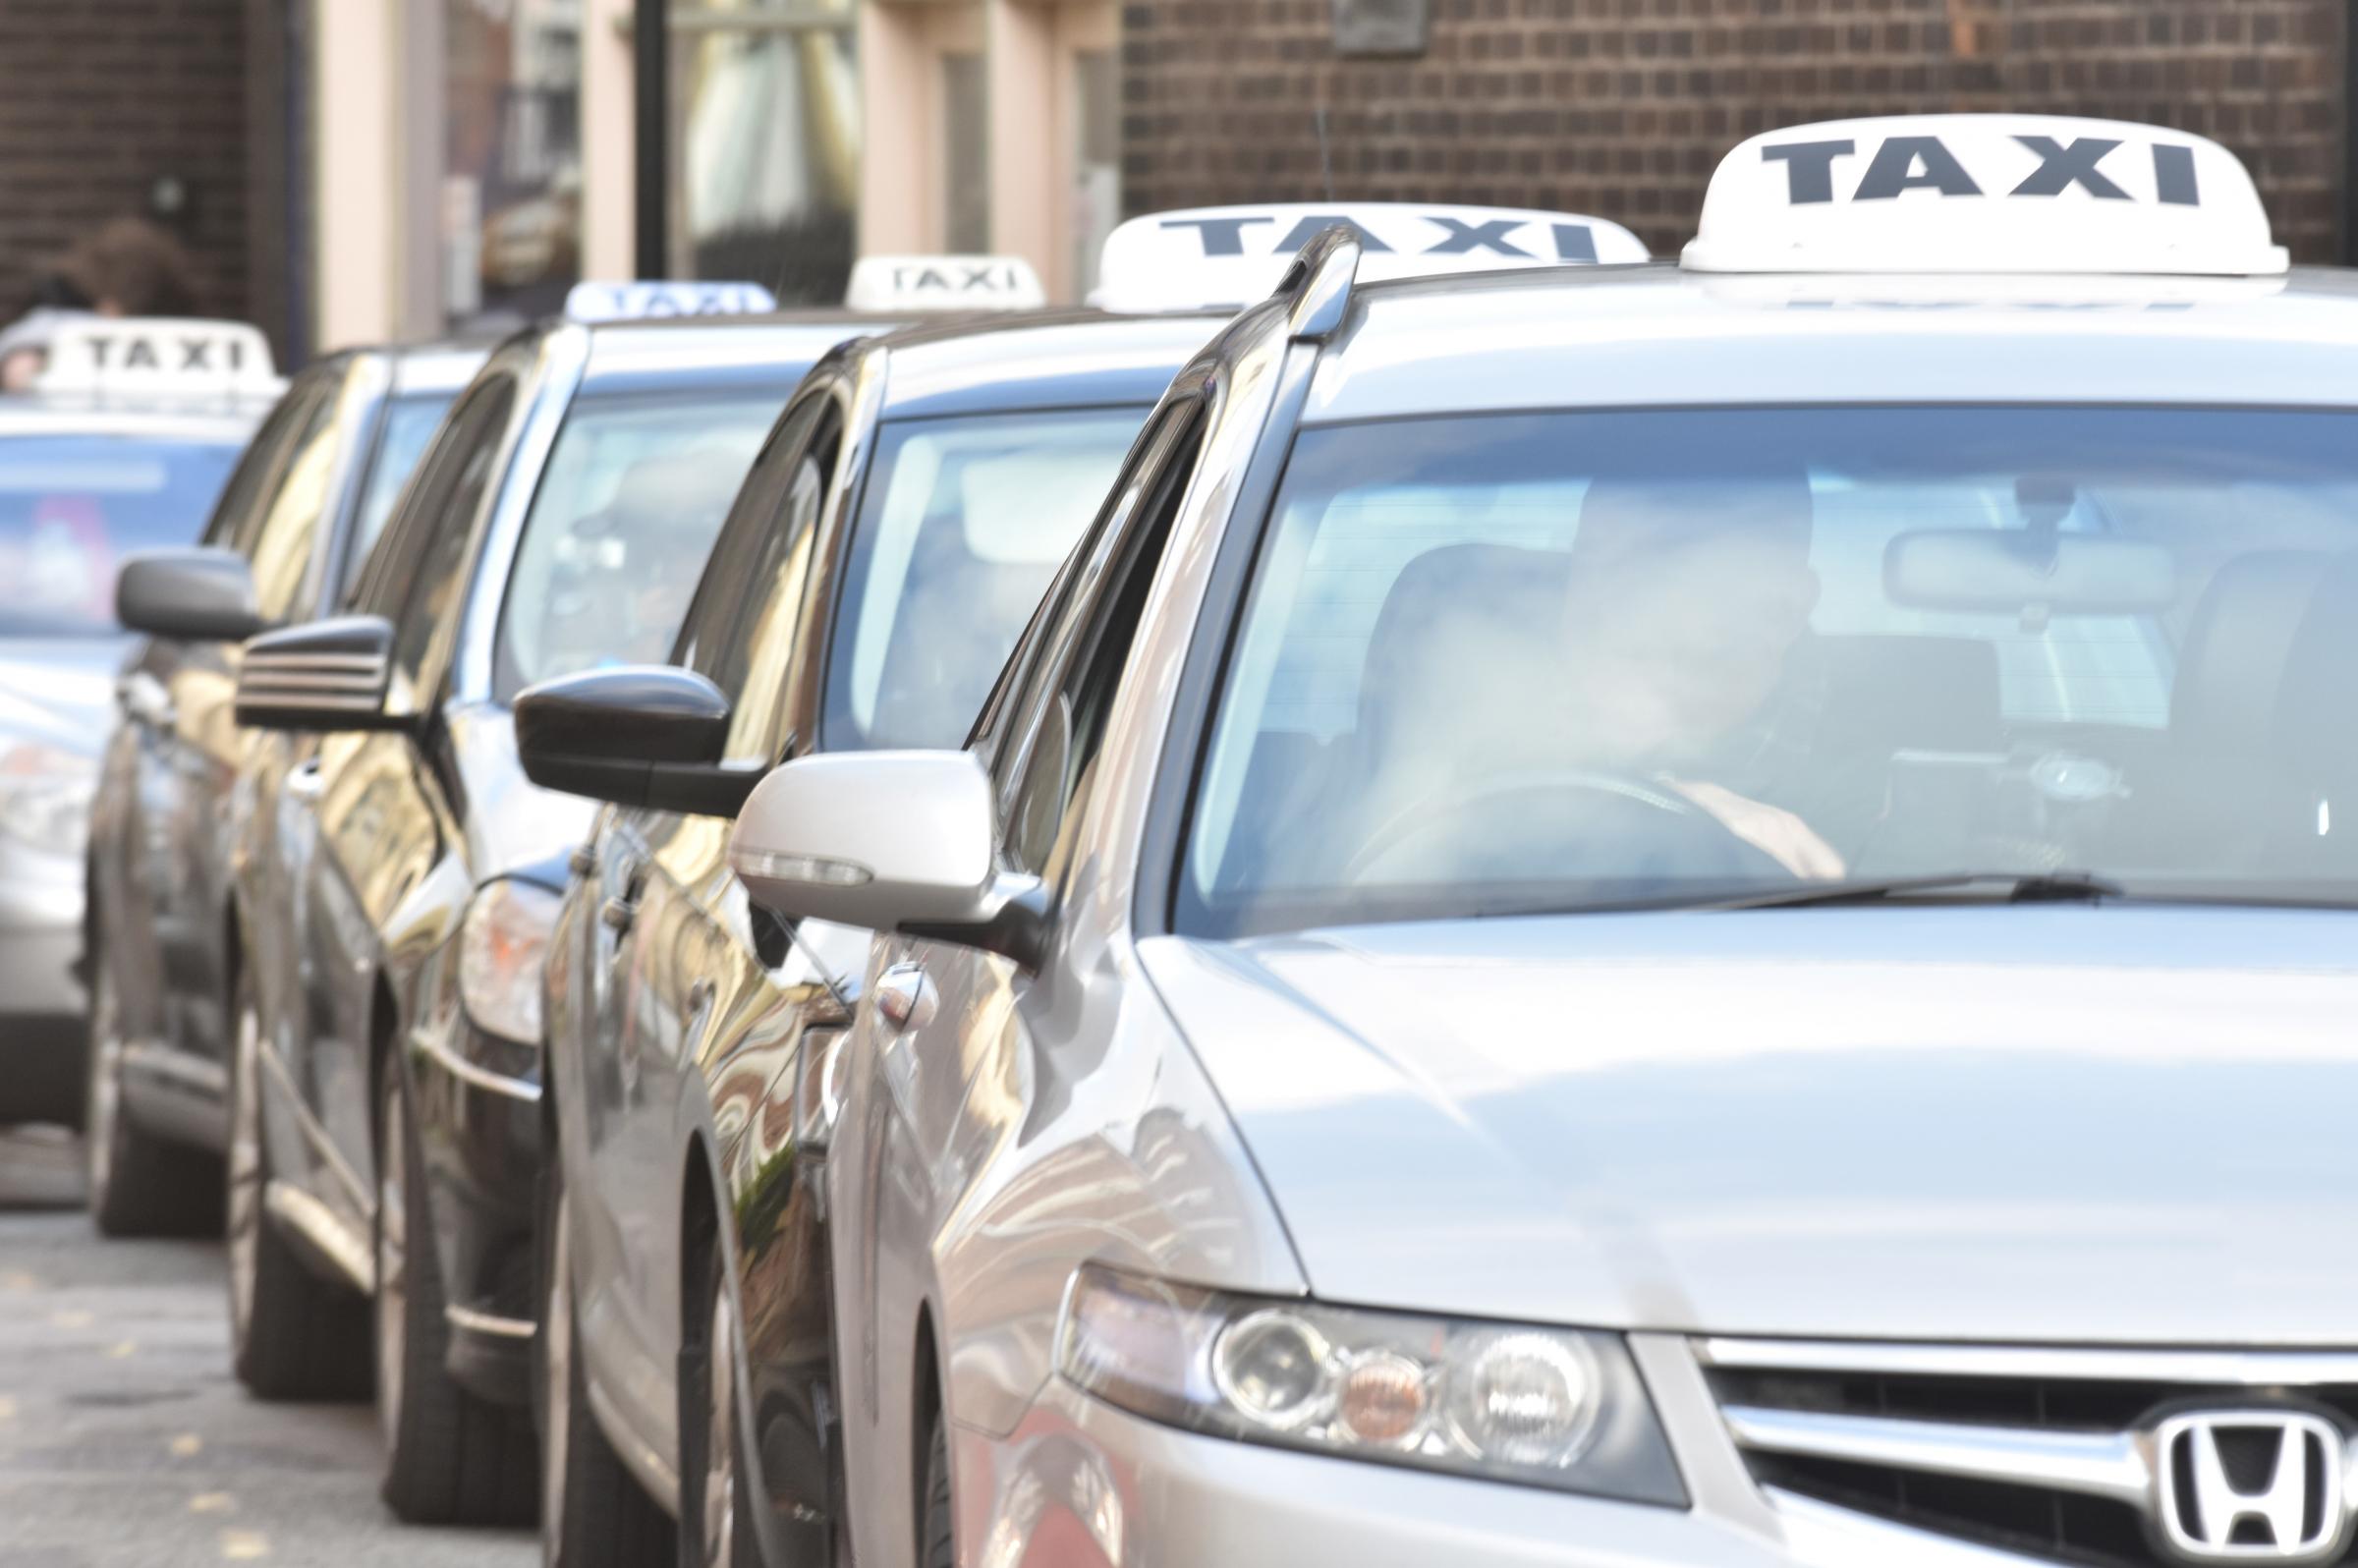 York taxi drivers call for action over Uber